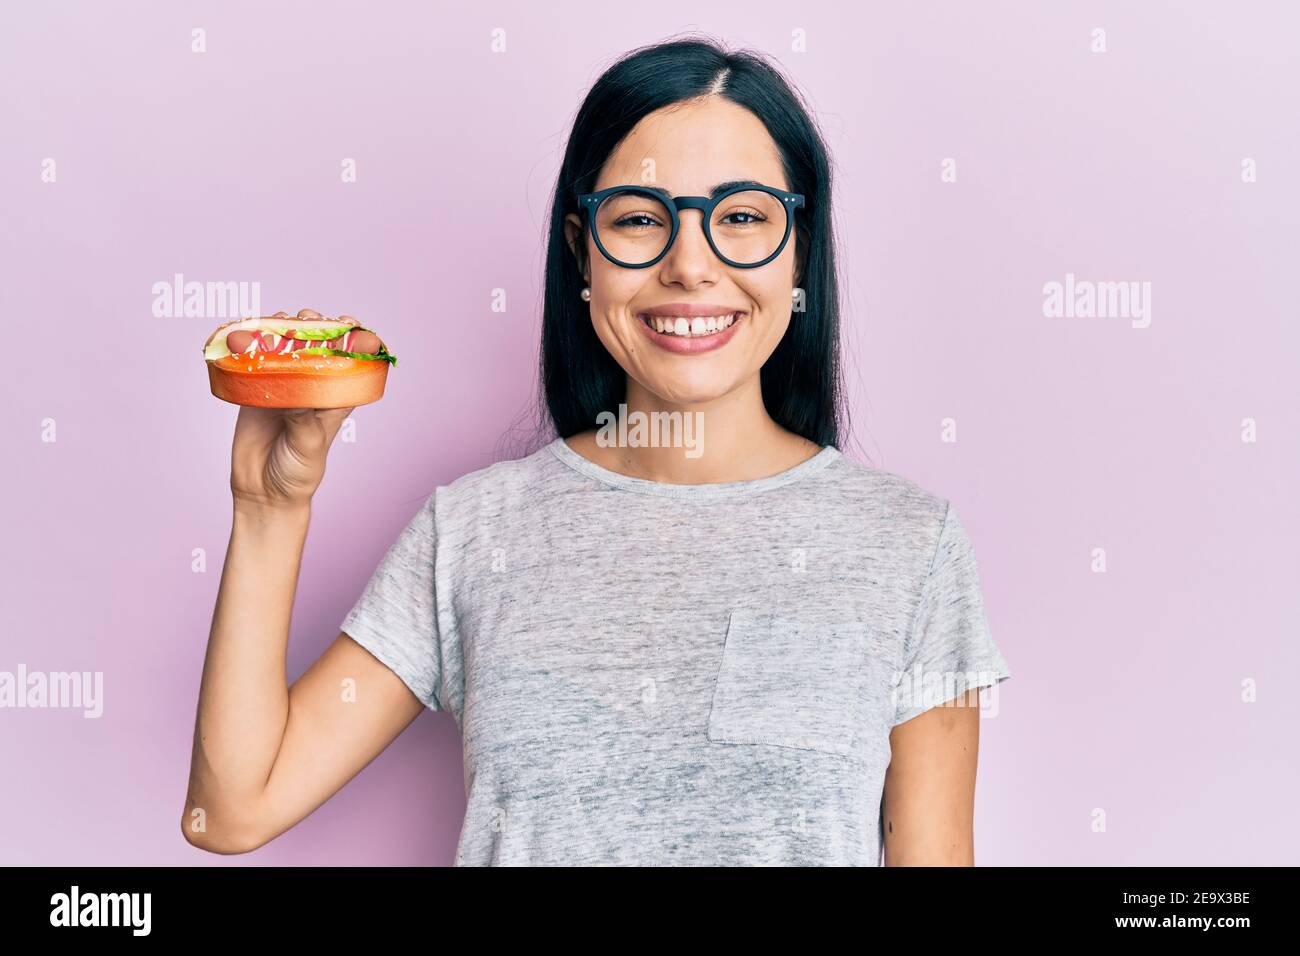 Beautiful young woman eating hotdog looking positive and happy standing and smiling with a confident smile showing teeth Stock Photo